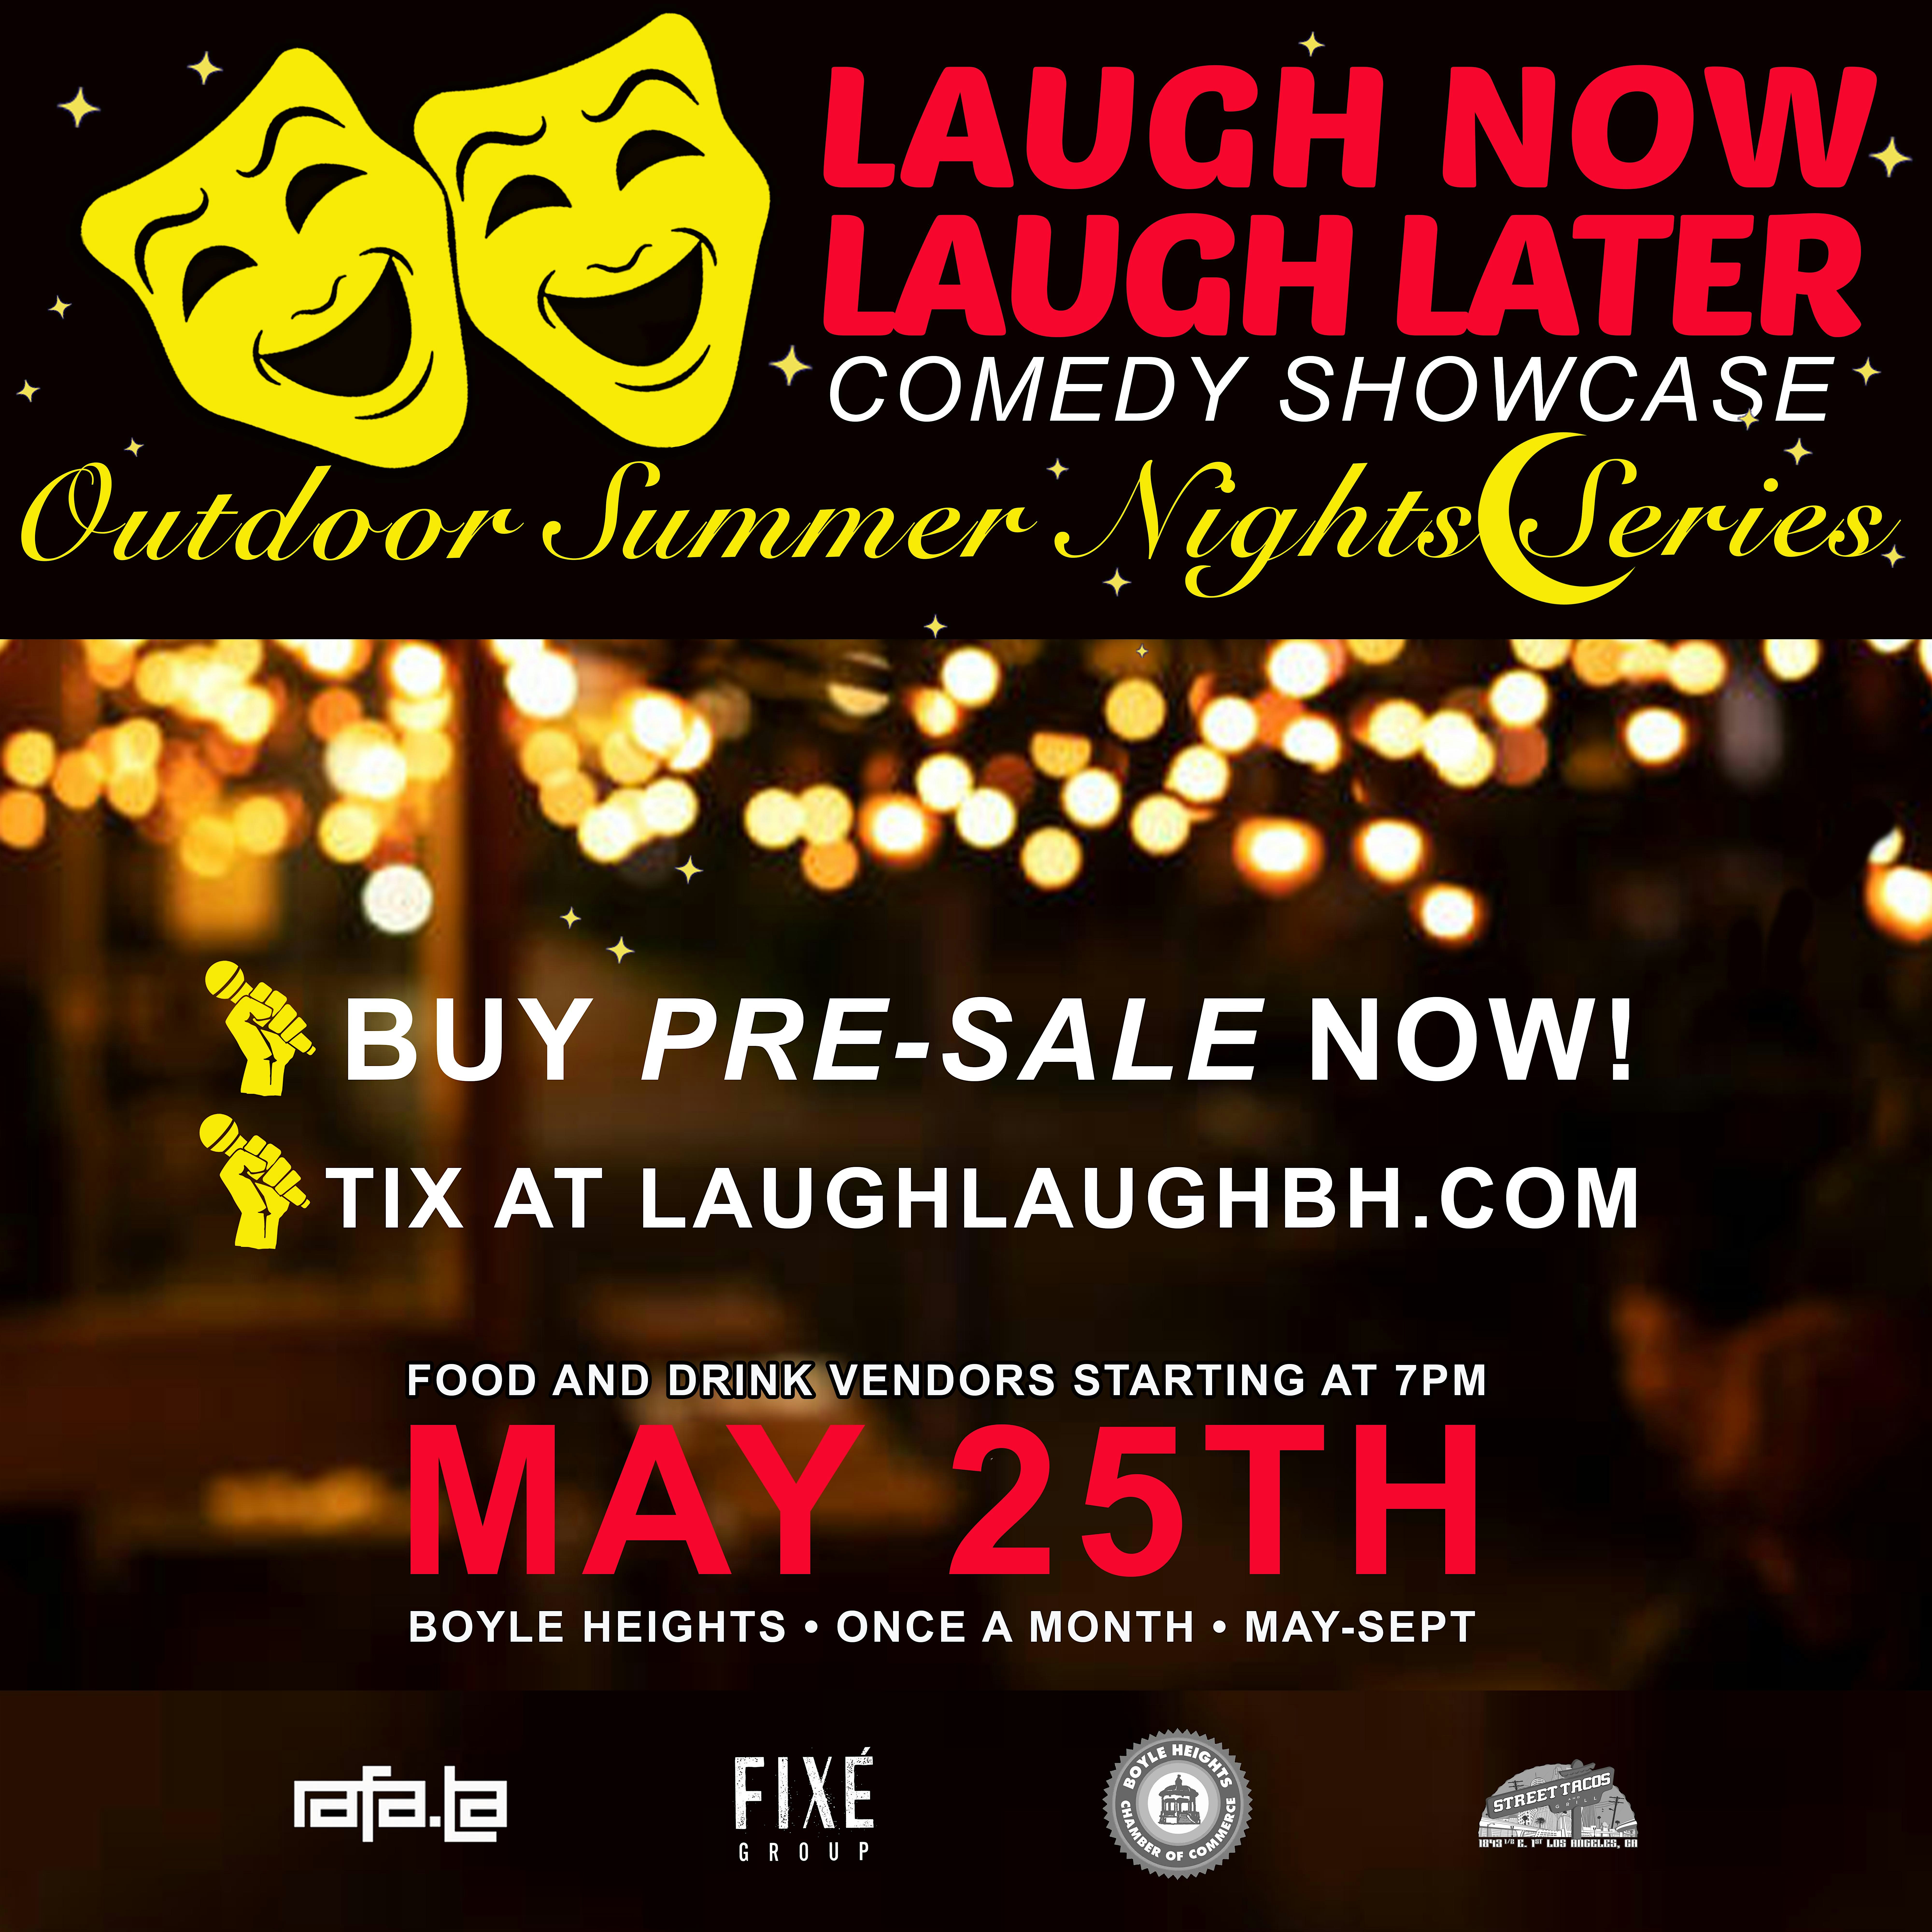 SEPTEMBER - LAUGH NOW,  LAUGH LATER - Comedy Showcase